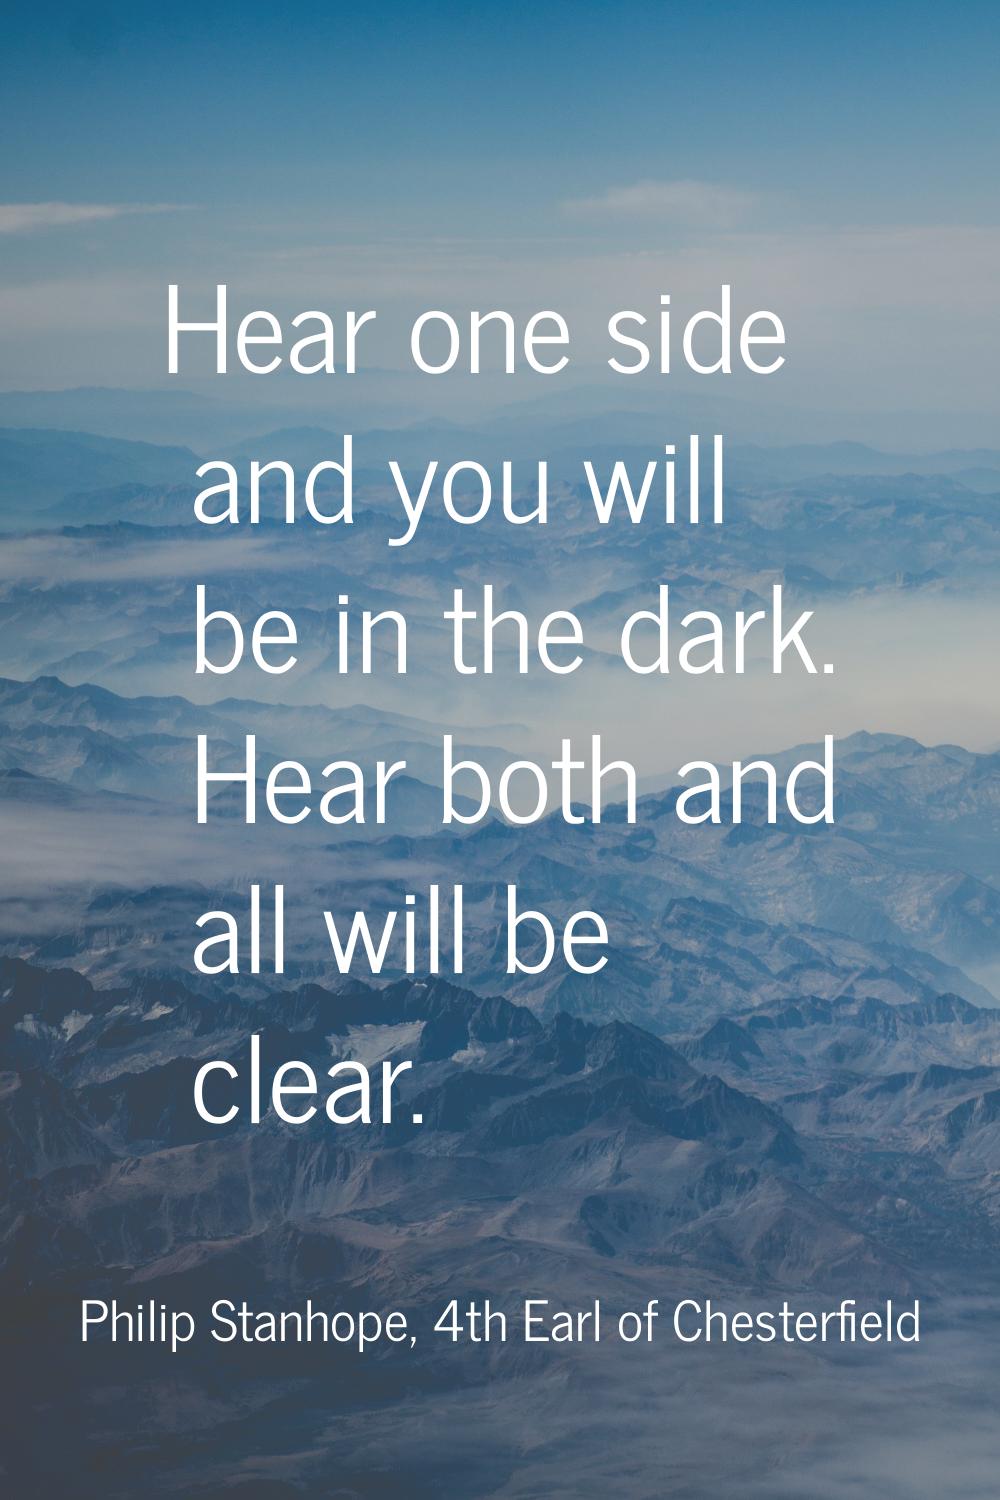 Hear one side and you will be in the dark. Hear both and all will be clear.